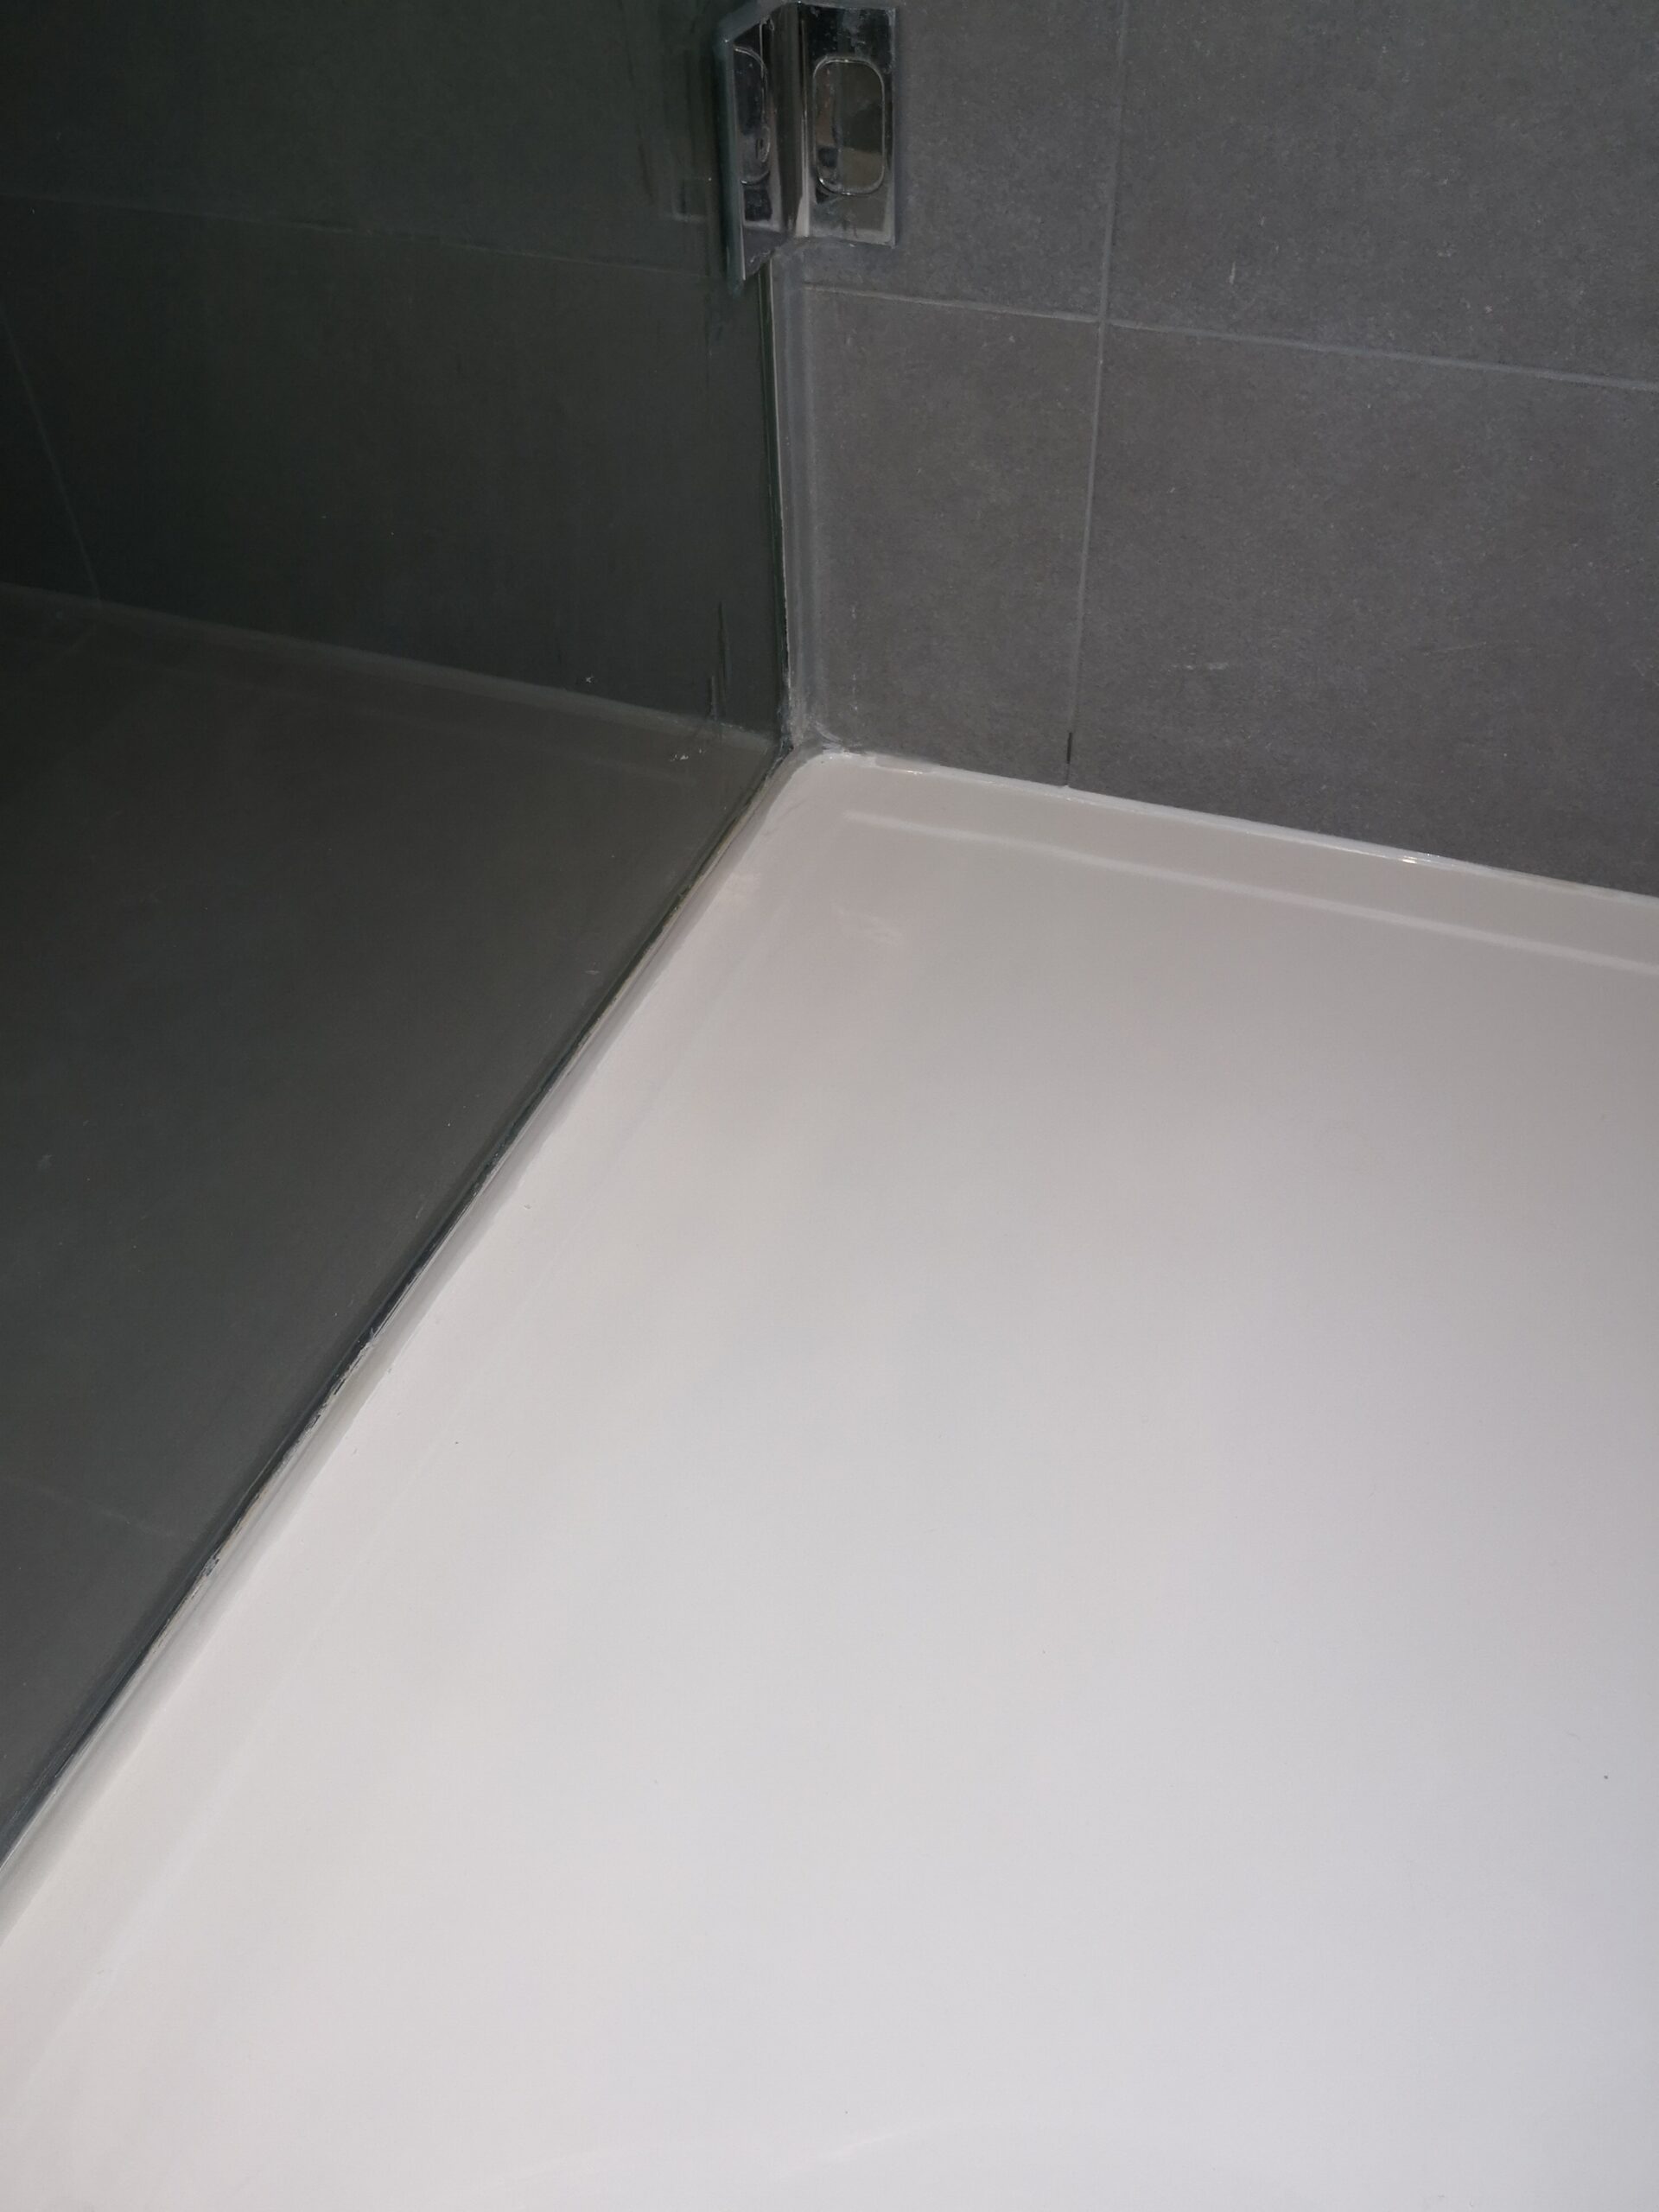 ST05 Cracked shower tray.Tray repaired Incredible but true Alt. angle scaled